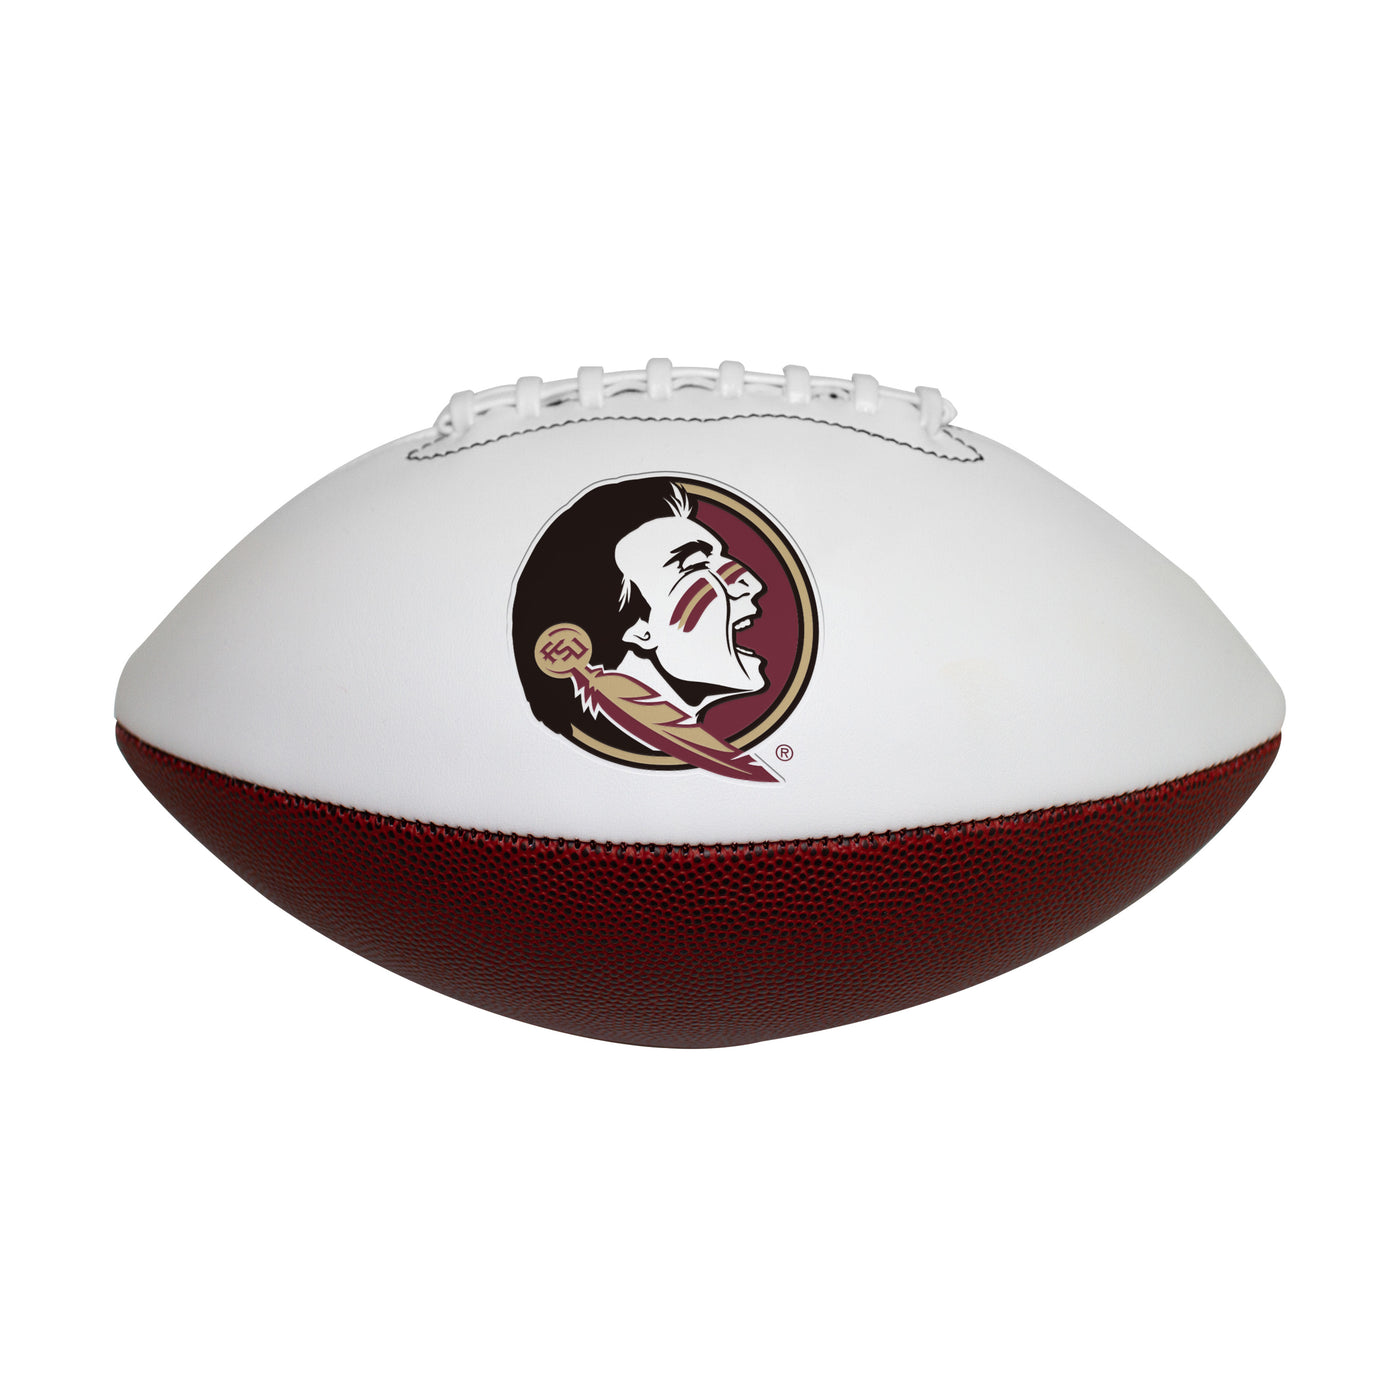 FL State Official-Size Autograph Football